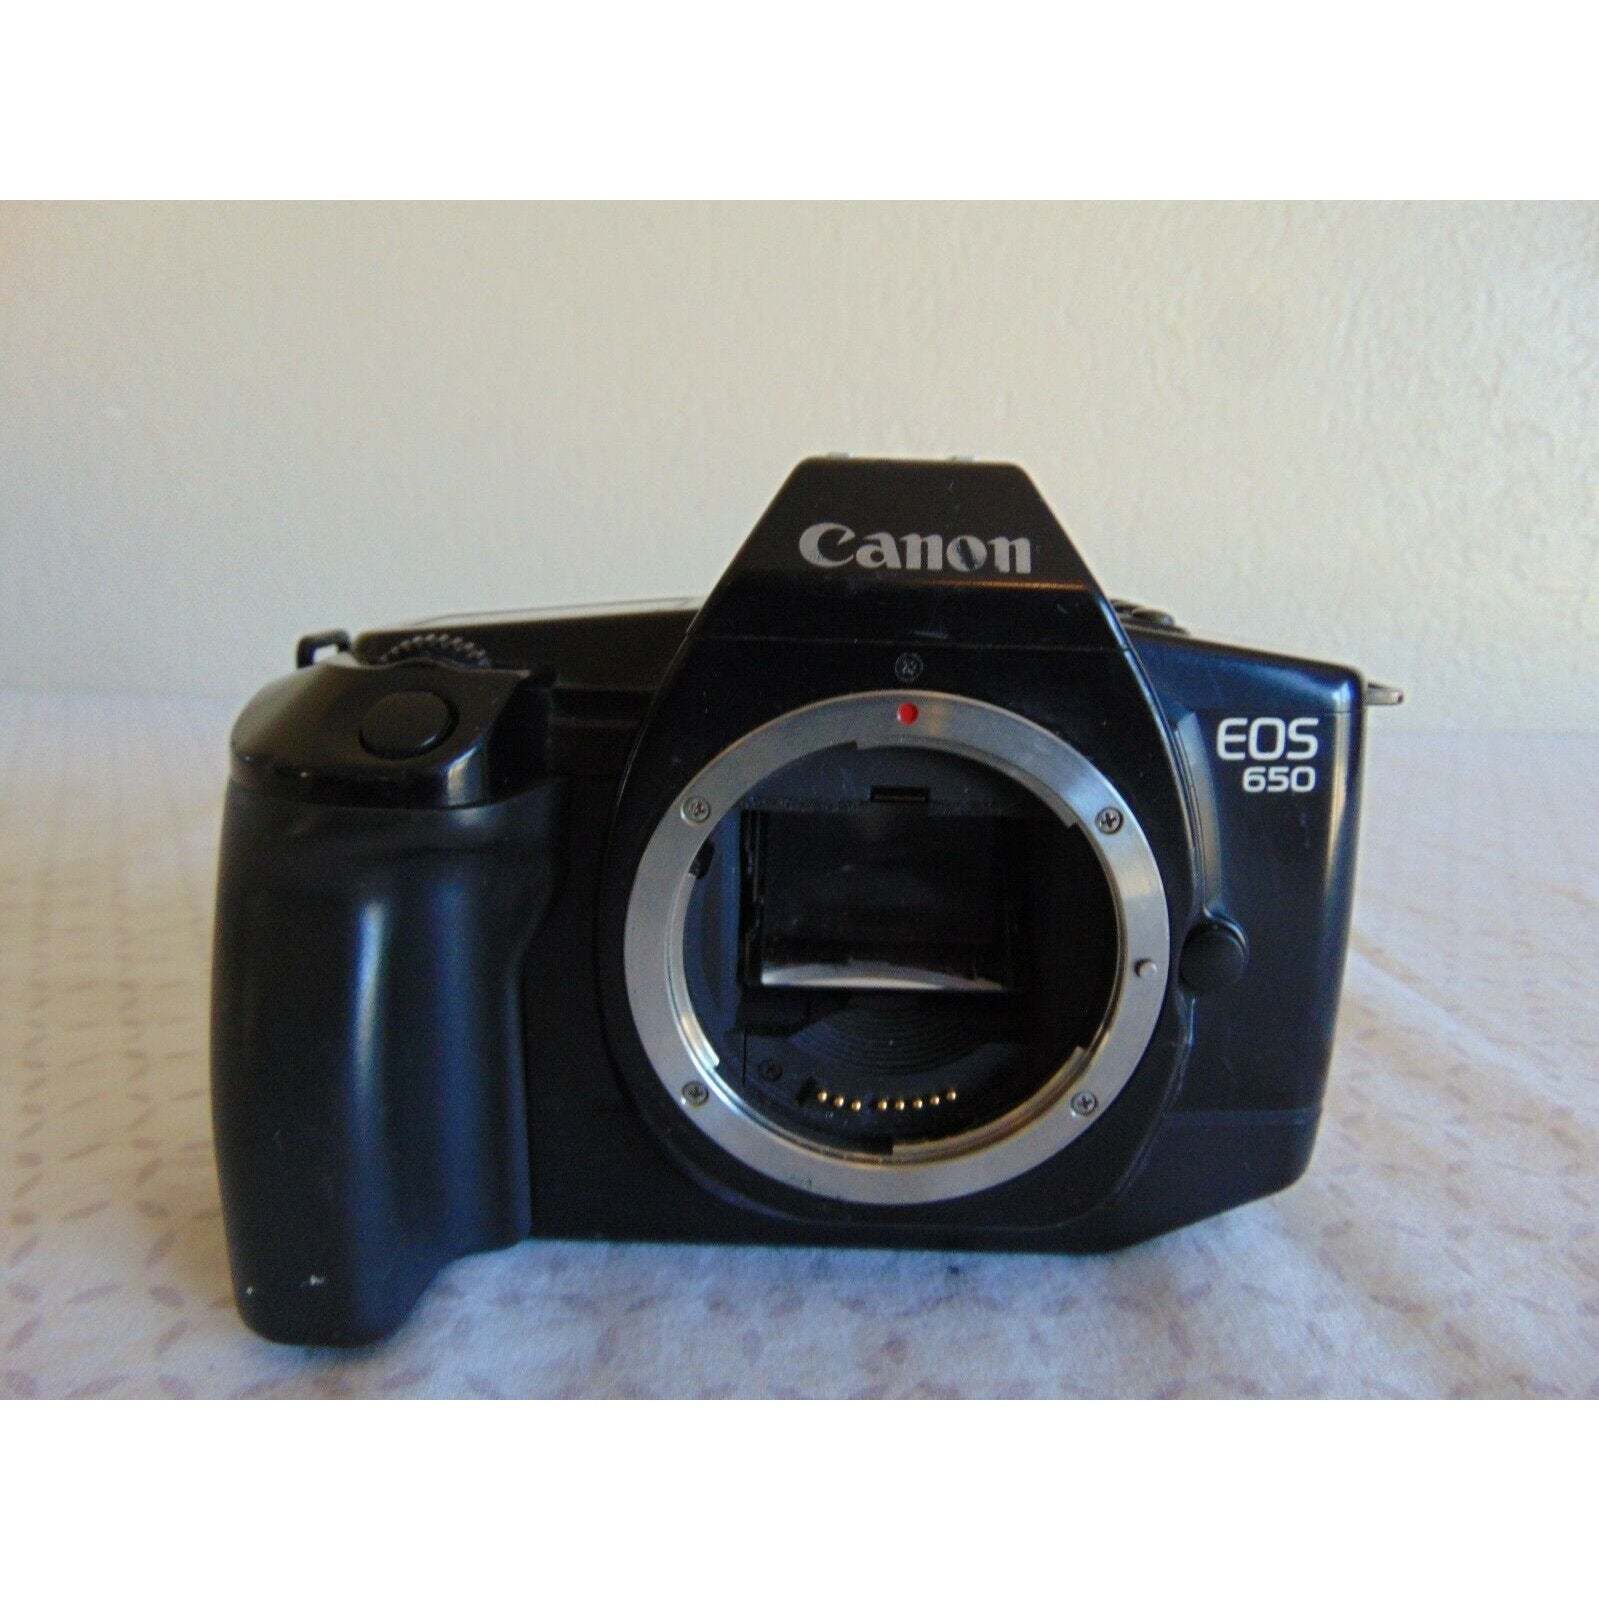 Primary image for Canon EOS 650 SLR 35mm Film Camera Body Only